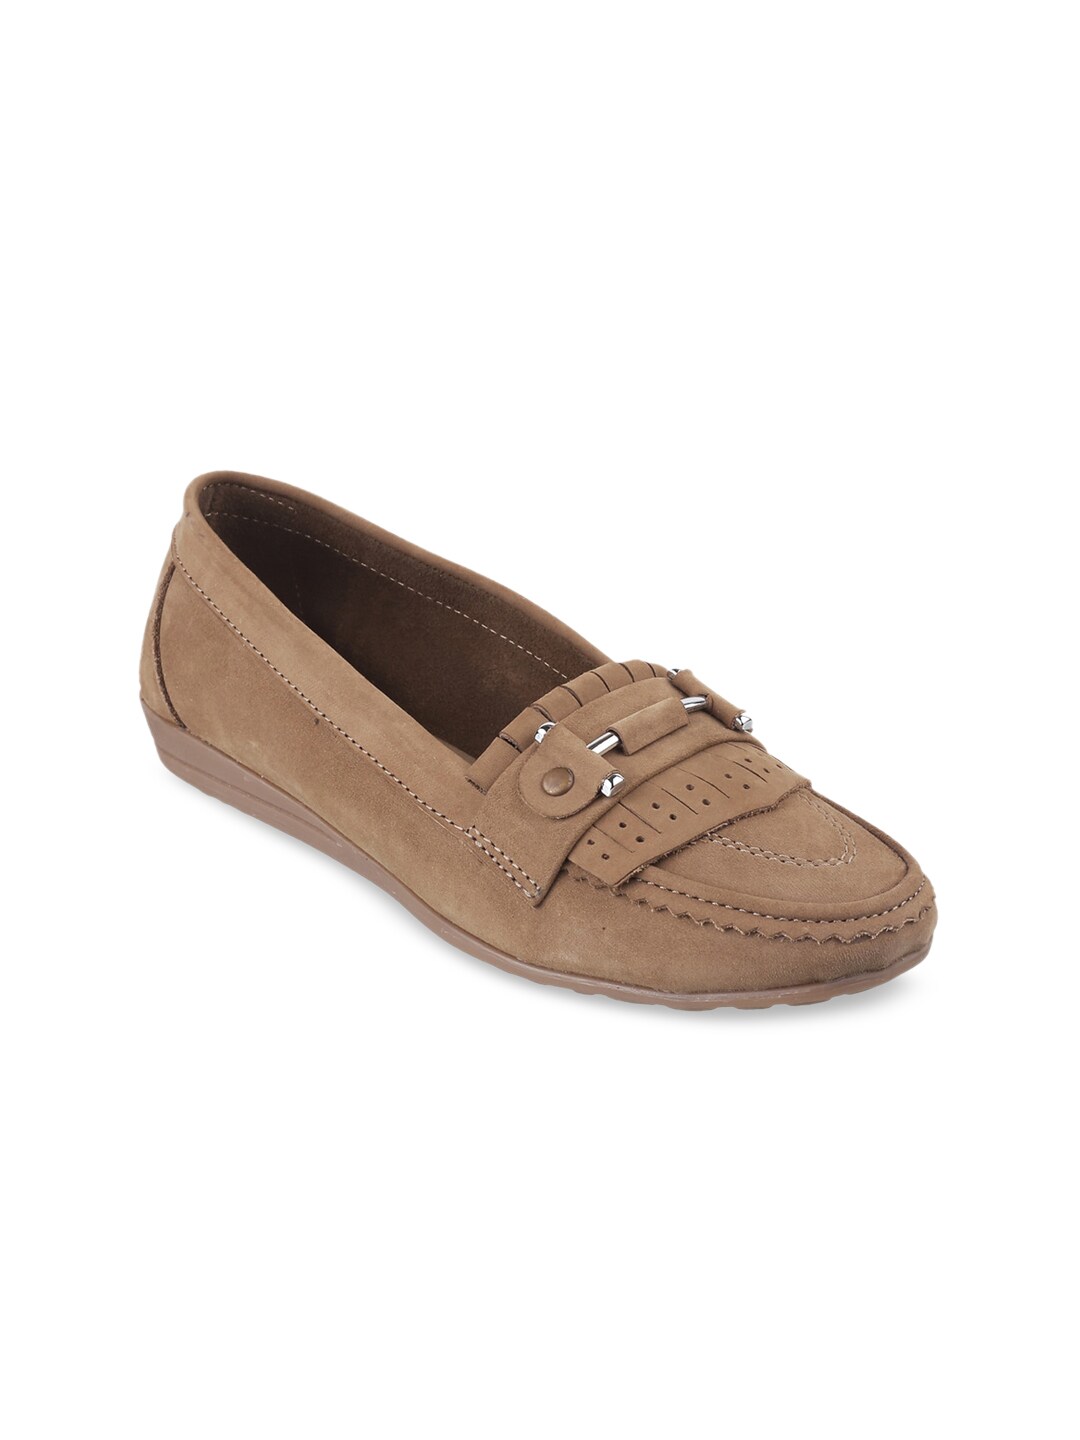 Catwalk Women Beige Woven Design Leather Loafers Price in India